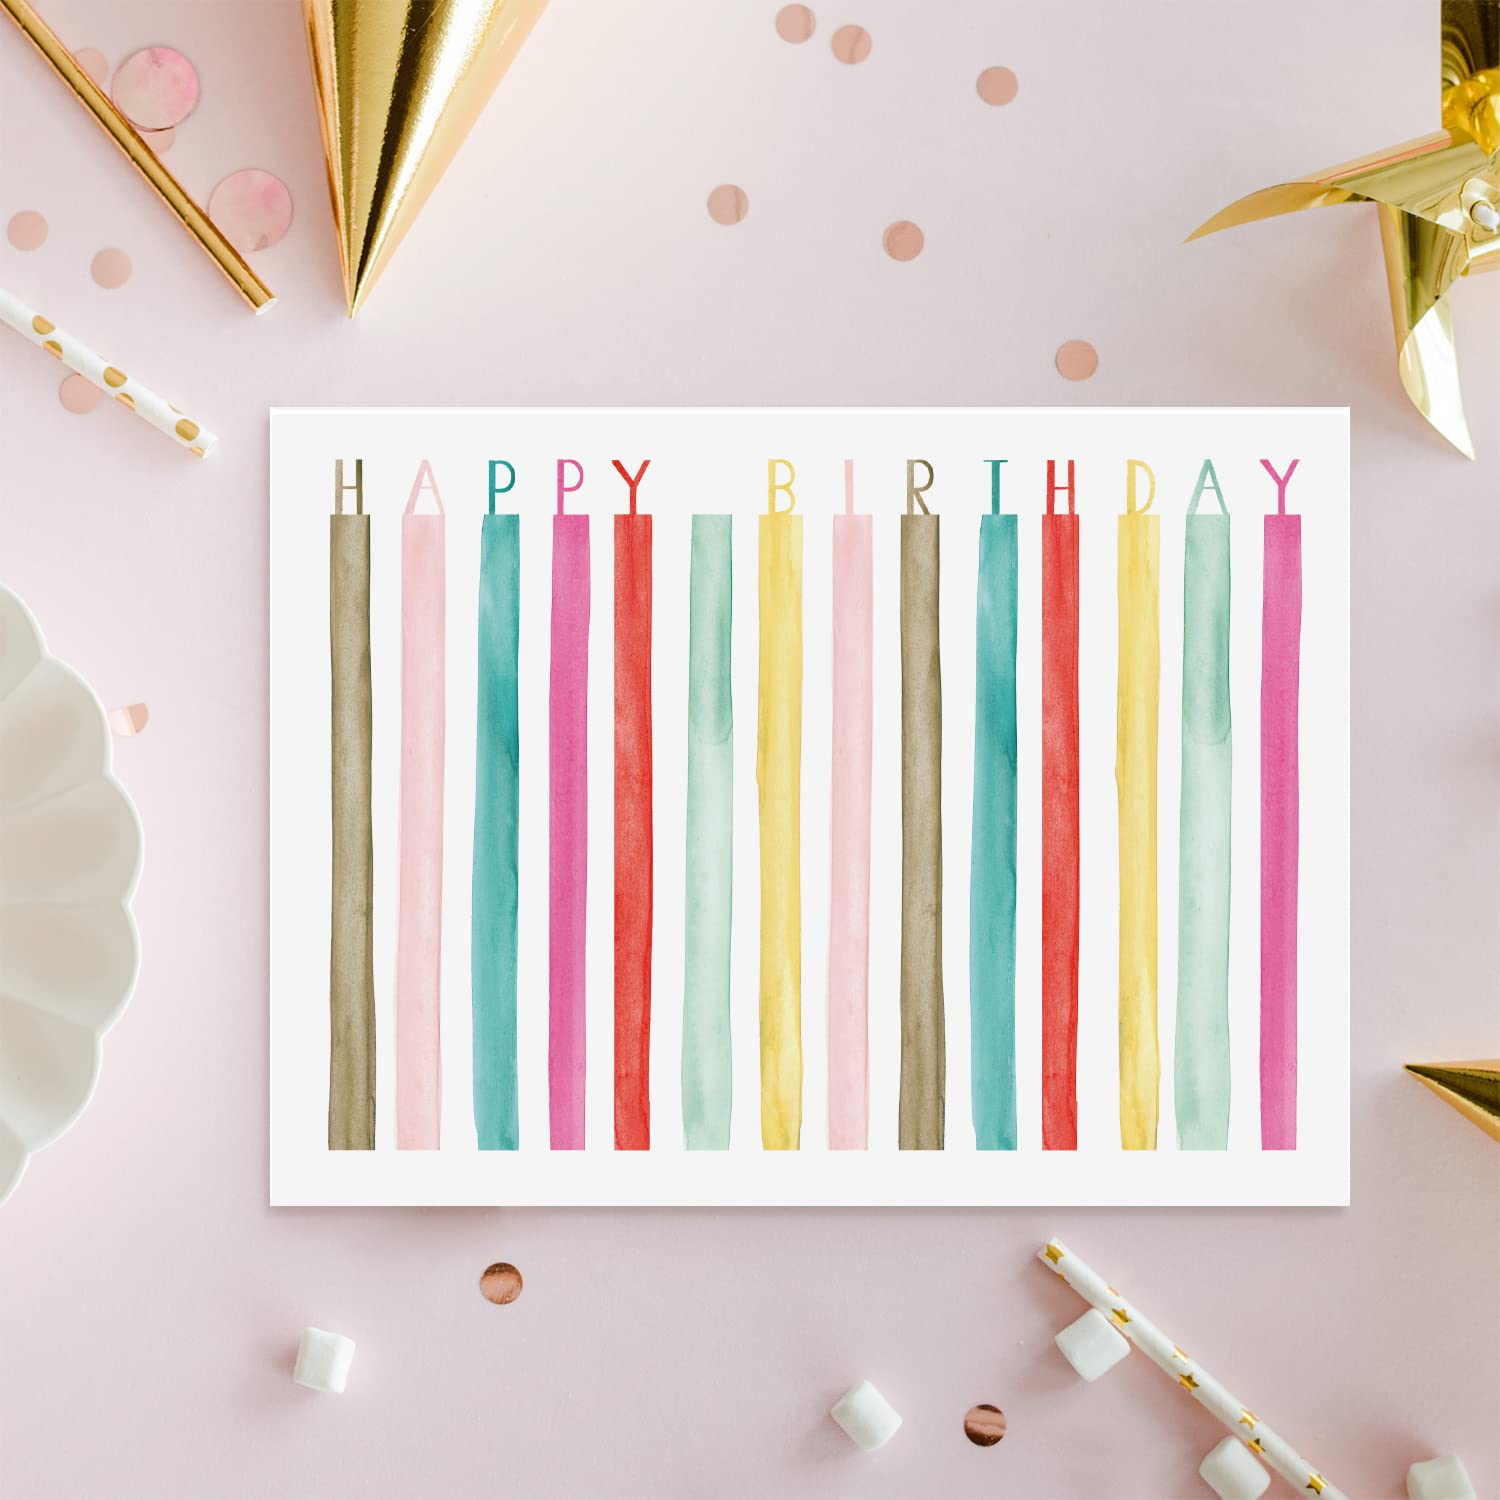 Sweetzer & Orange Watercolor Bulk Birthday Cards Assortment – 48pc Bulk Happy Birthday Card with Envelopes Box Set – Assorted Blank Birthday Cards for Women, Men, and Kids in a Boxed Card Pack